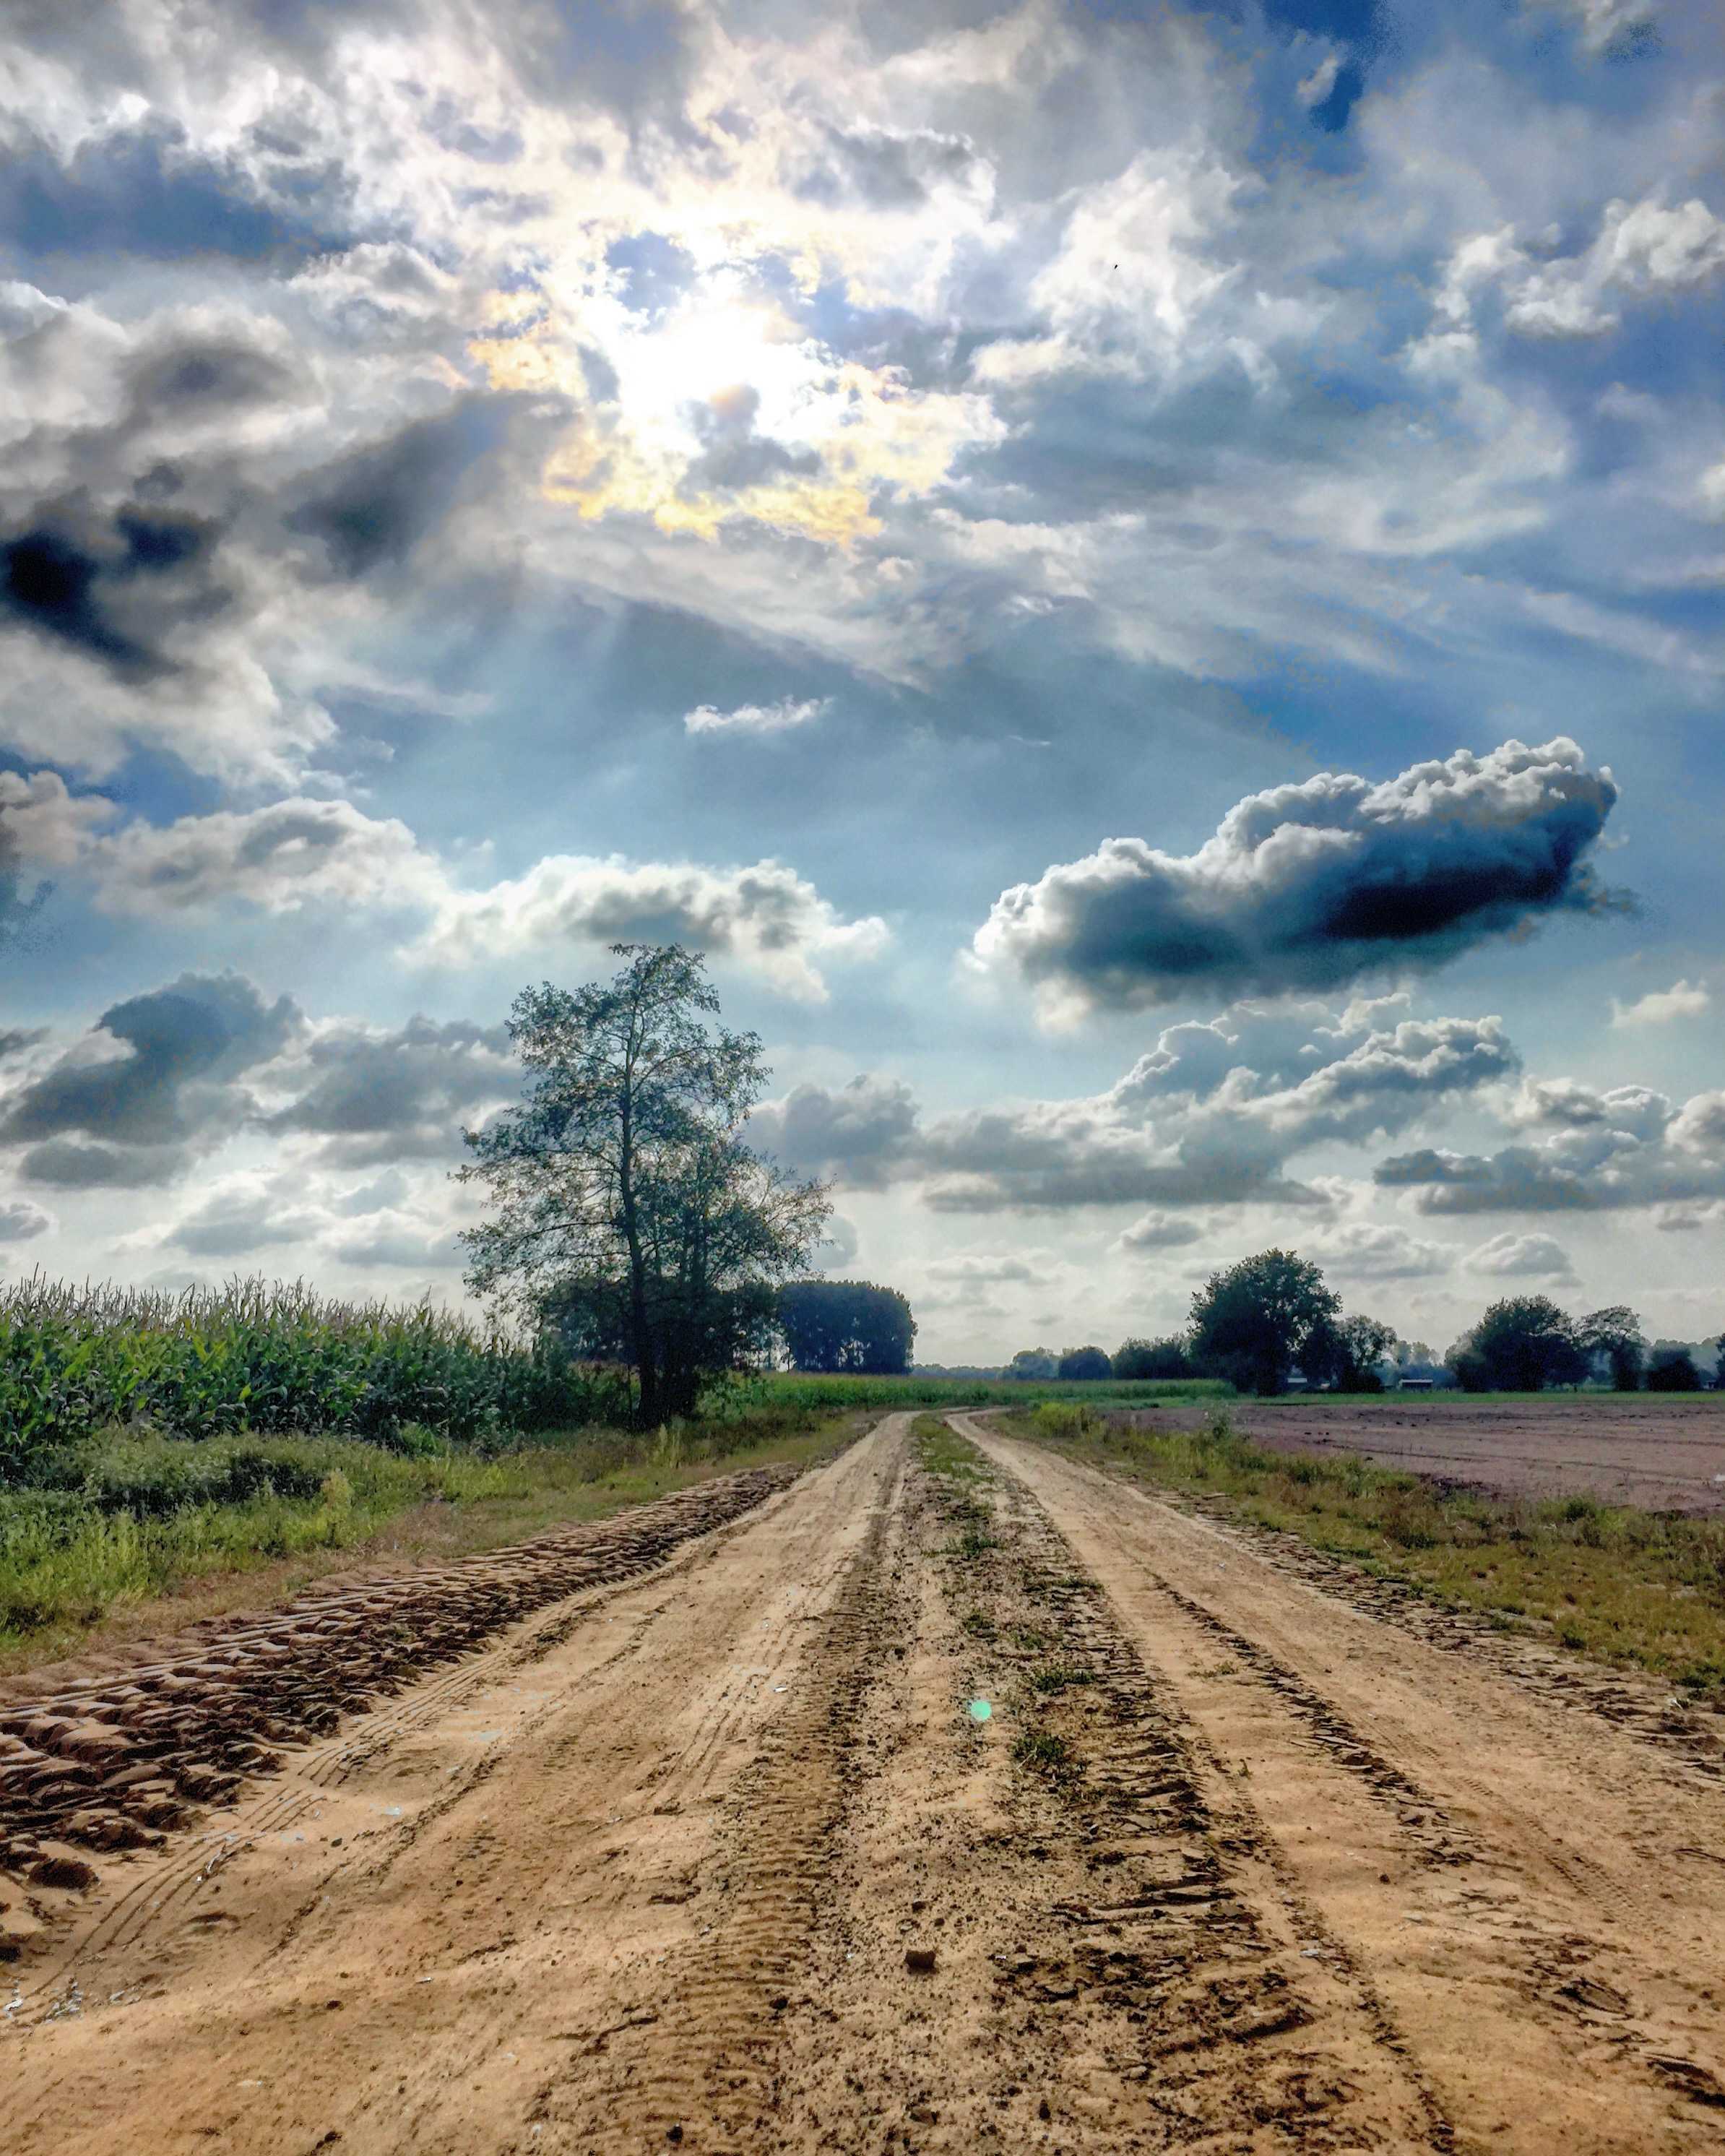 A field with a dirt road.